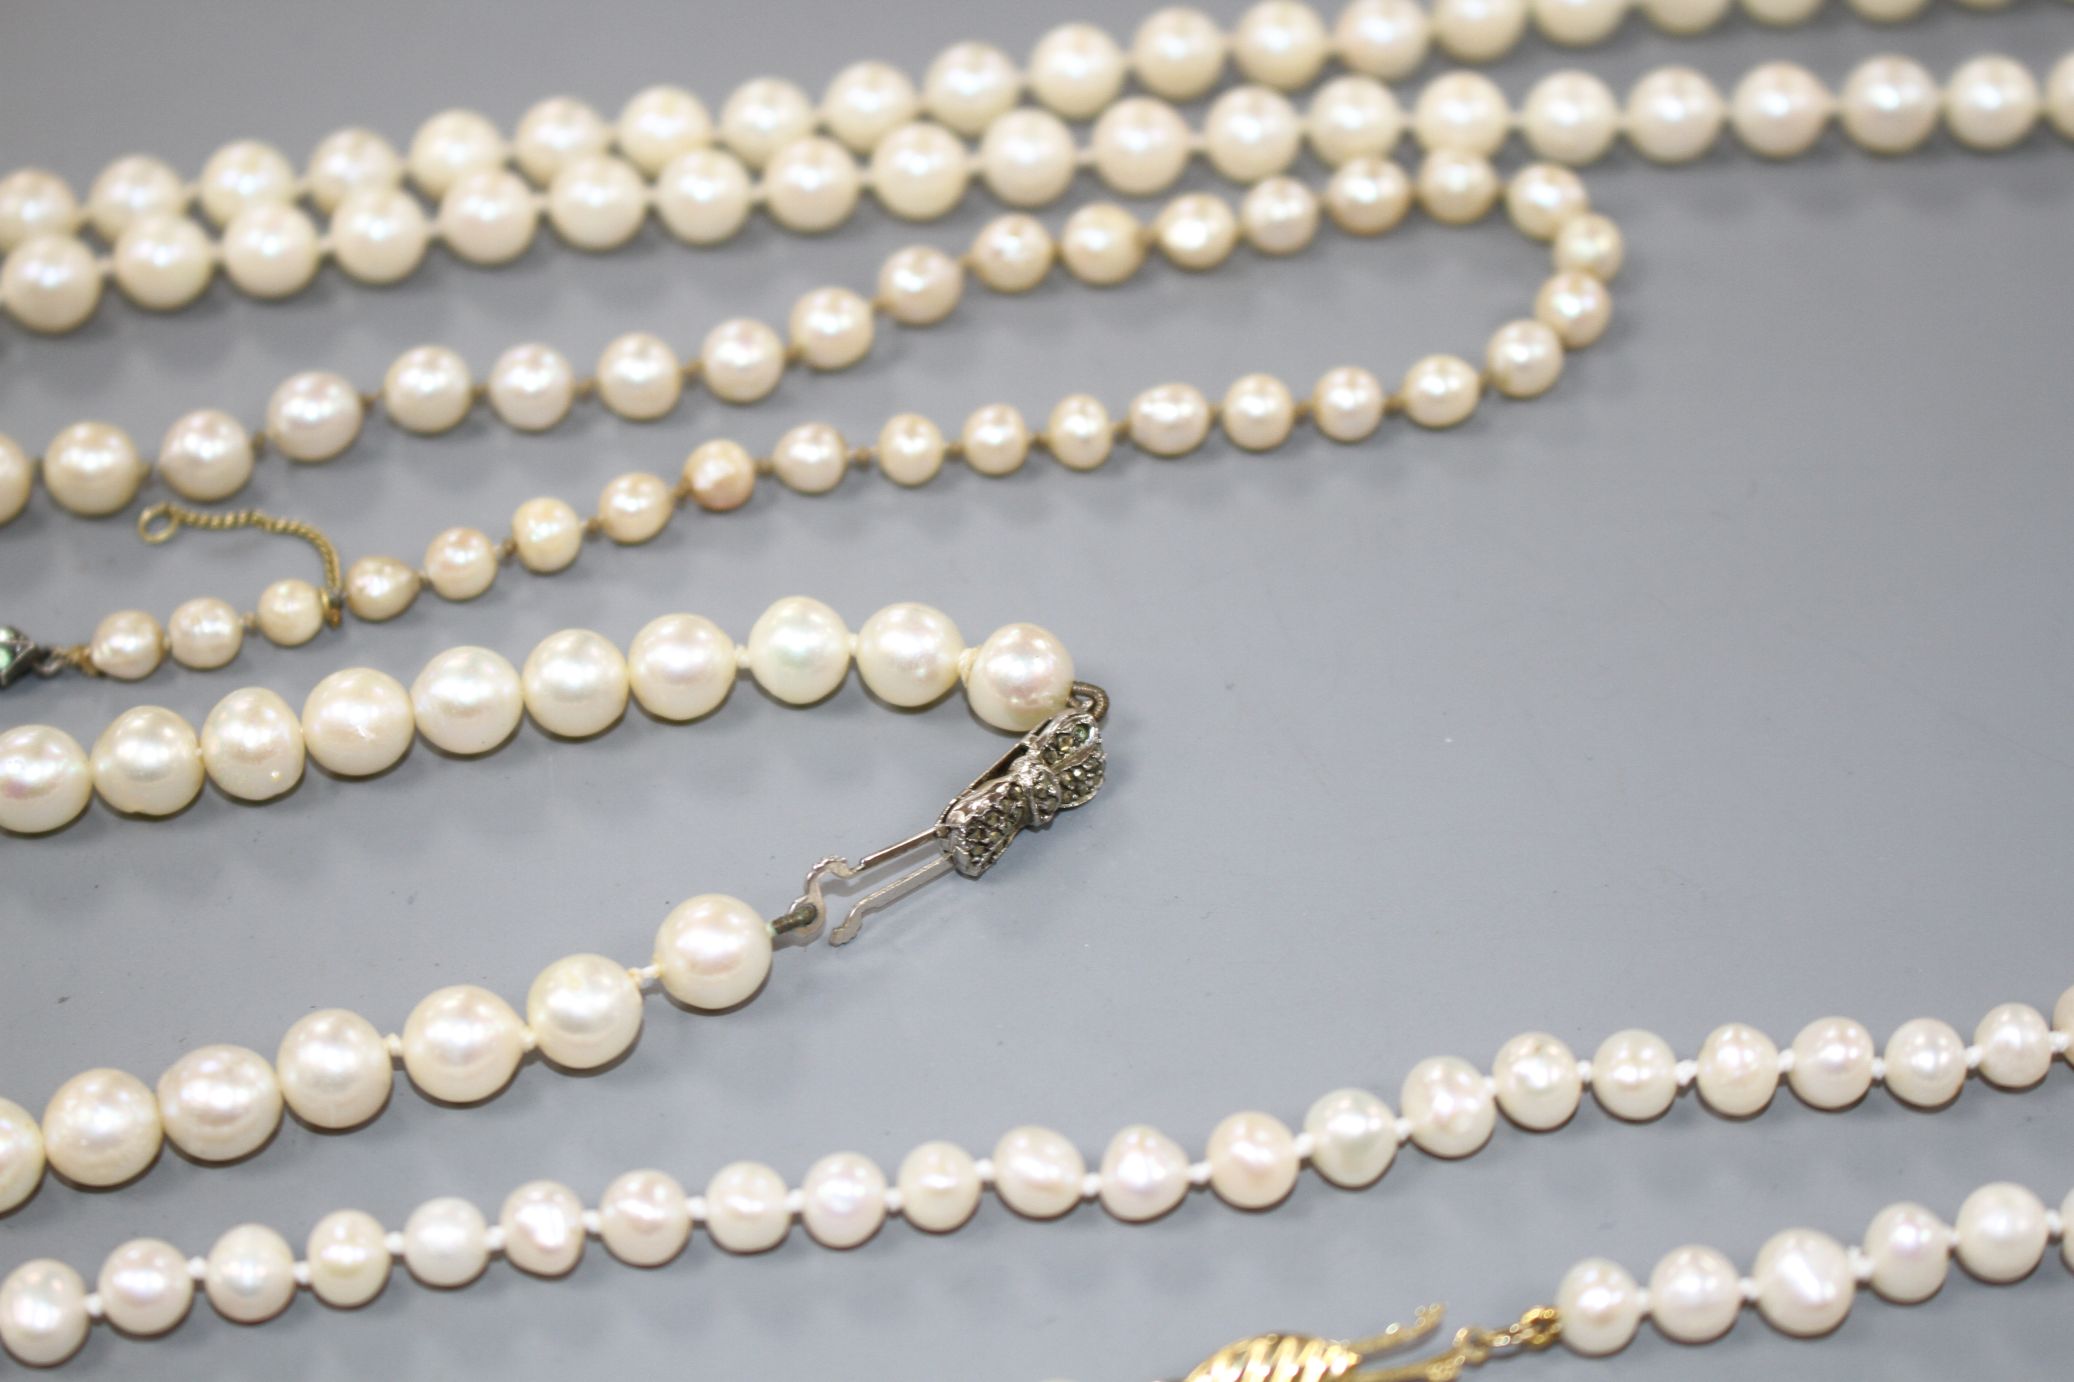 Seven assorted single strand cultured pearl necklaces, three with 925 clasps, two with 935 or 835 - Image 4 of 8